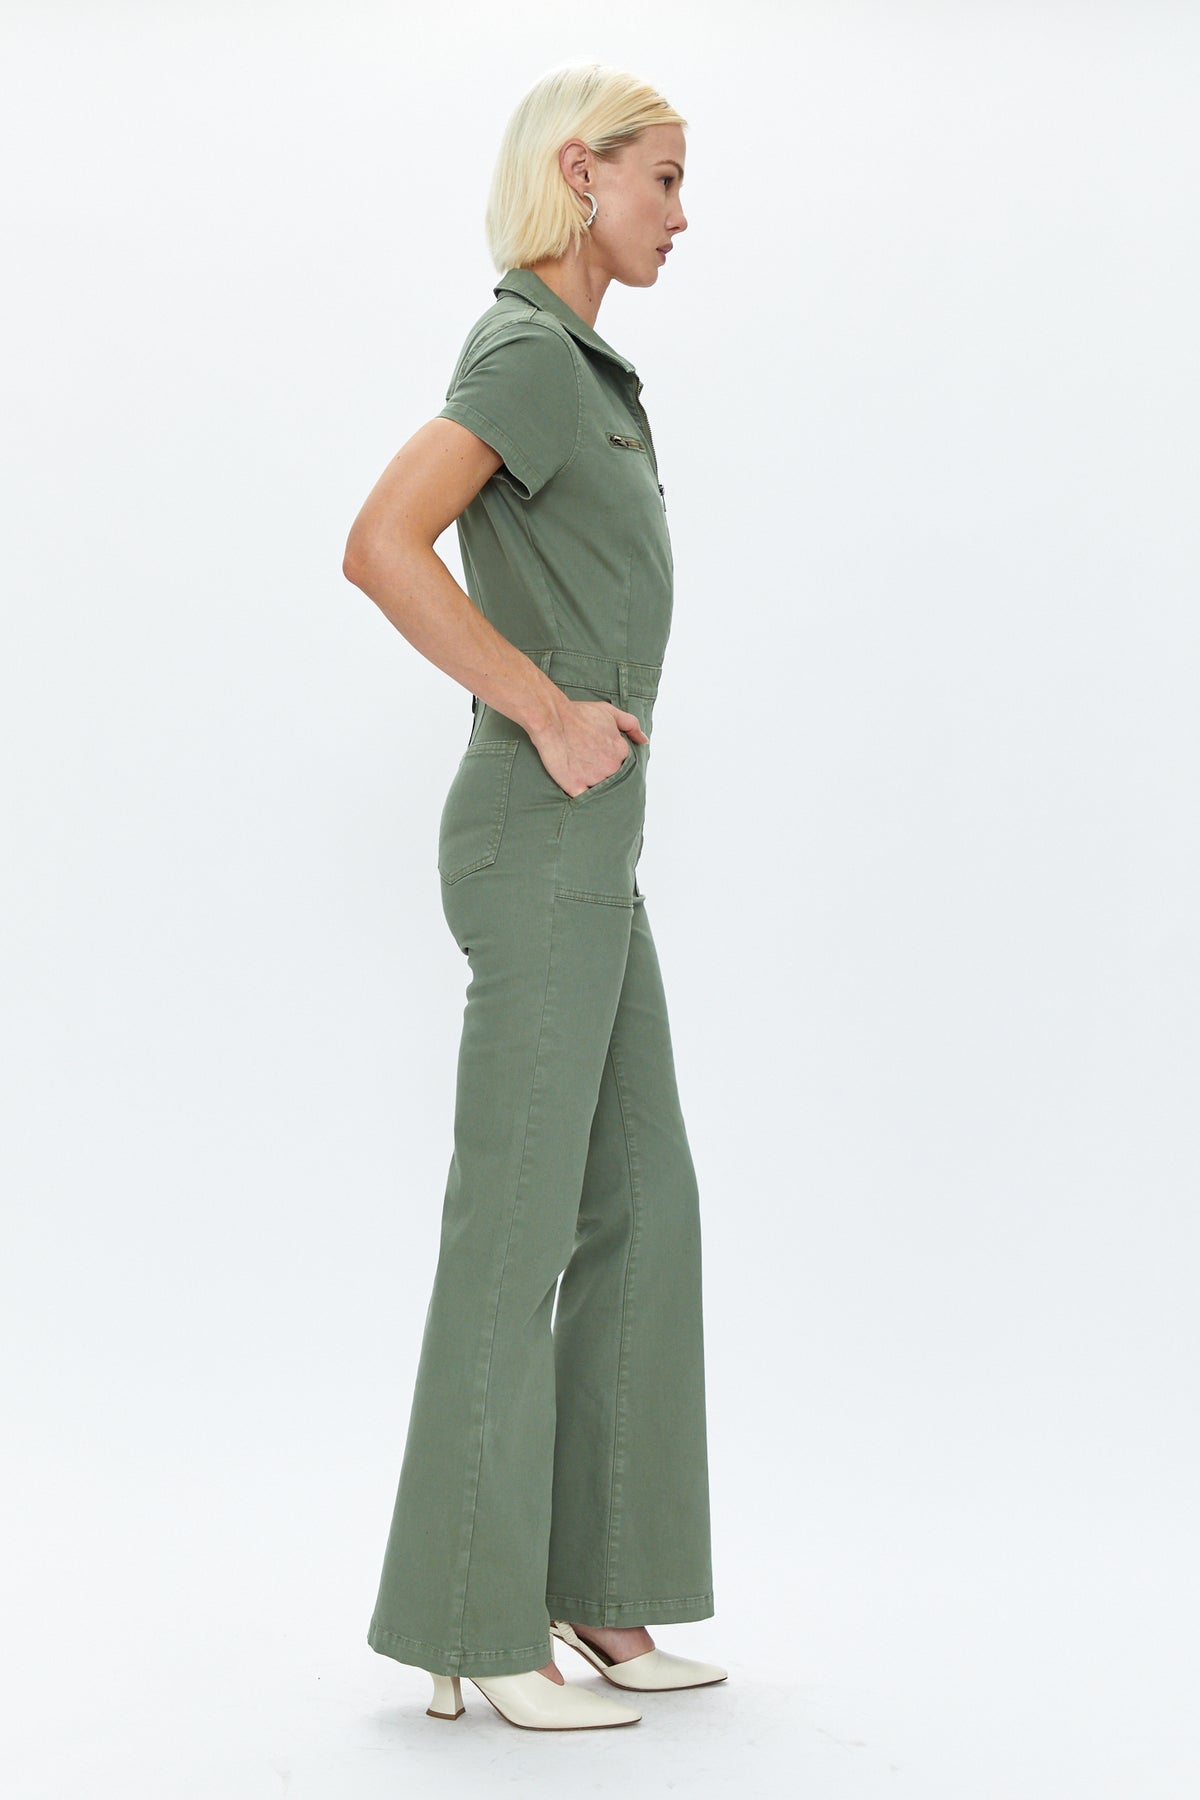 Martina Short Sleeve Flare Jumpsuit in Colonel